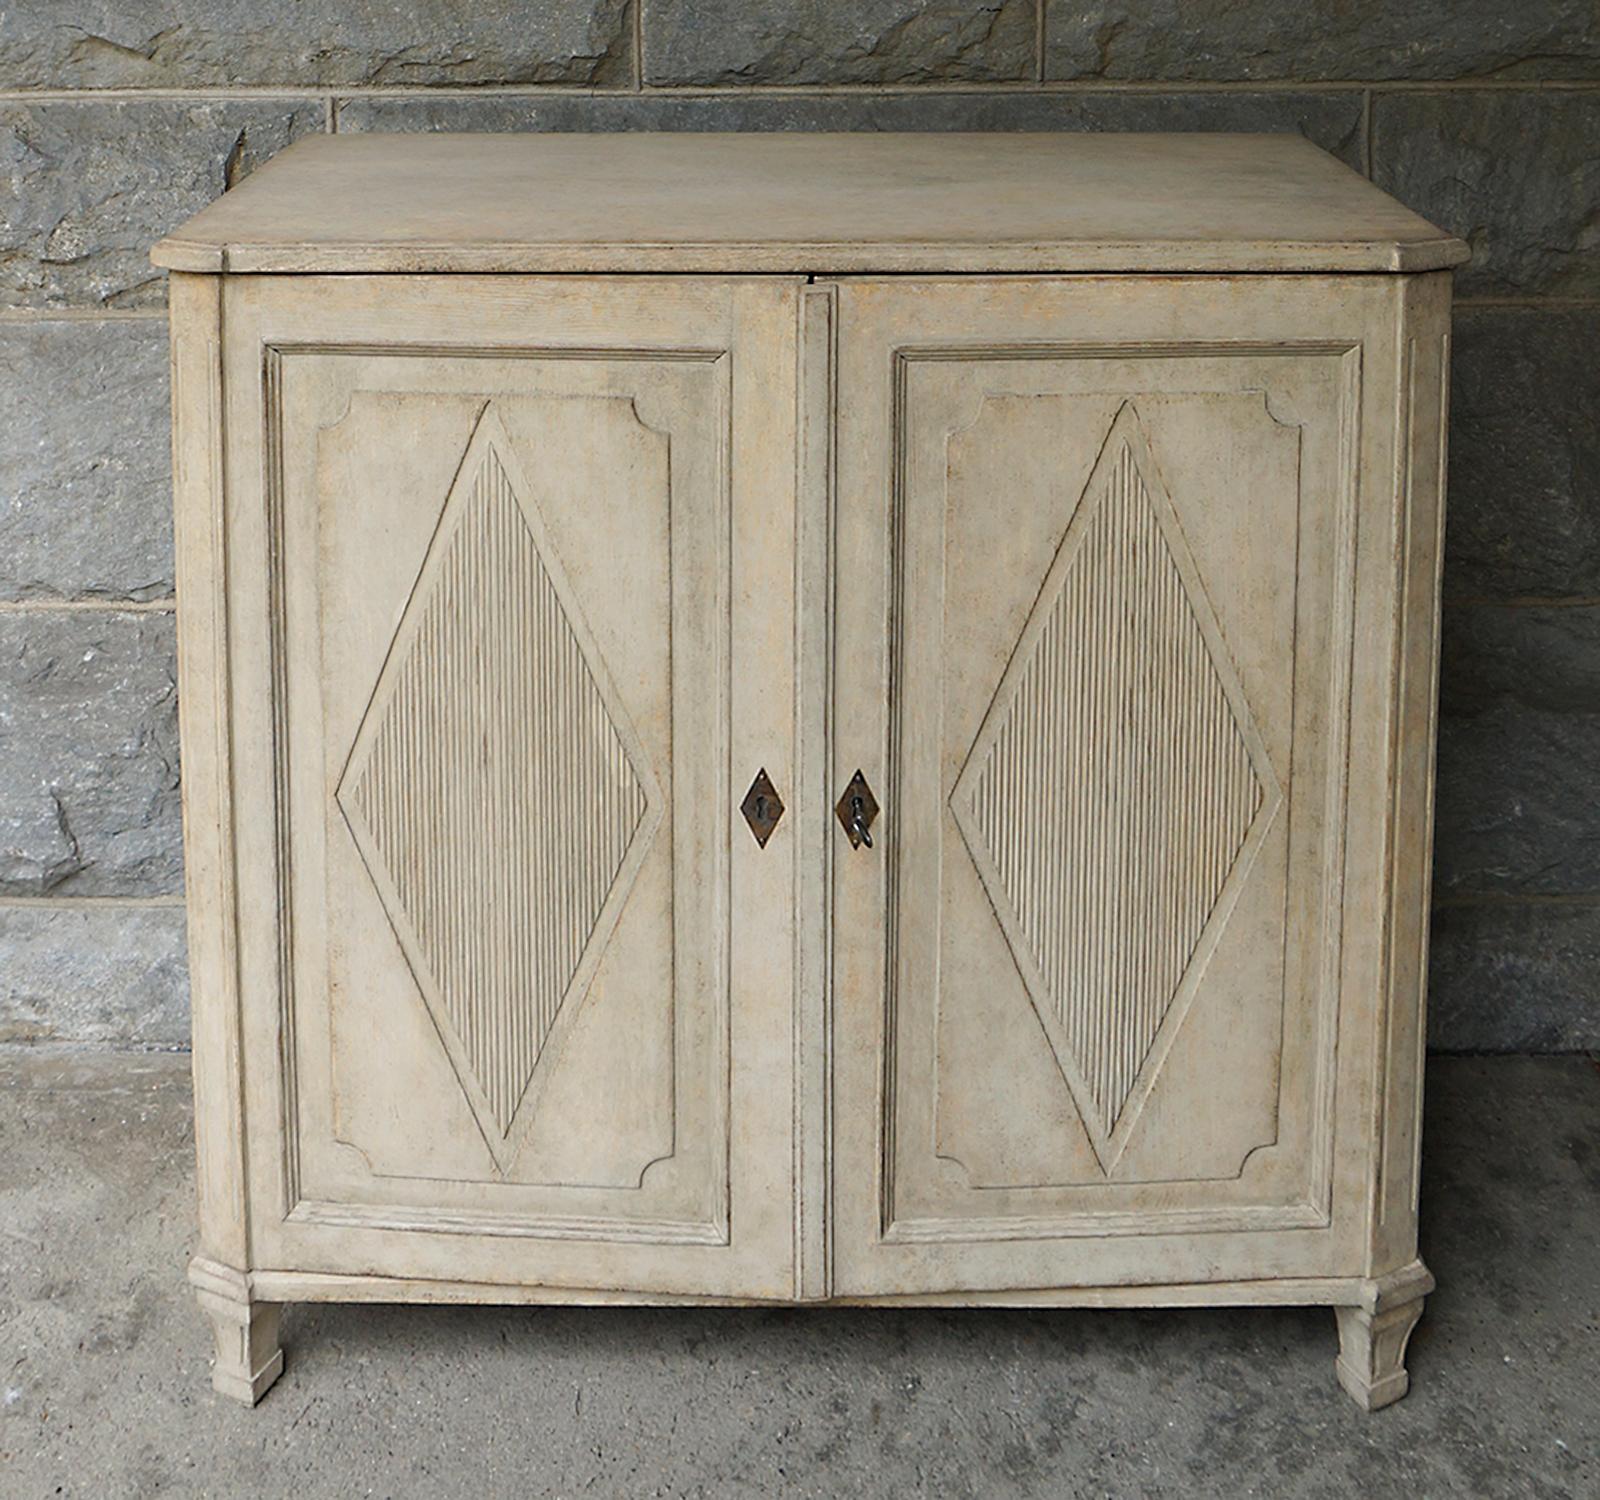 Late Gustavian style sideboard, Sweden circa 1860, with raised, reeded panels on the double doors. Canted corners over tapering square feet. Inside are two drawers over a fixed shelf.